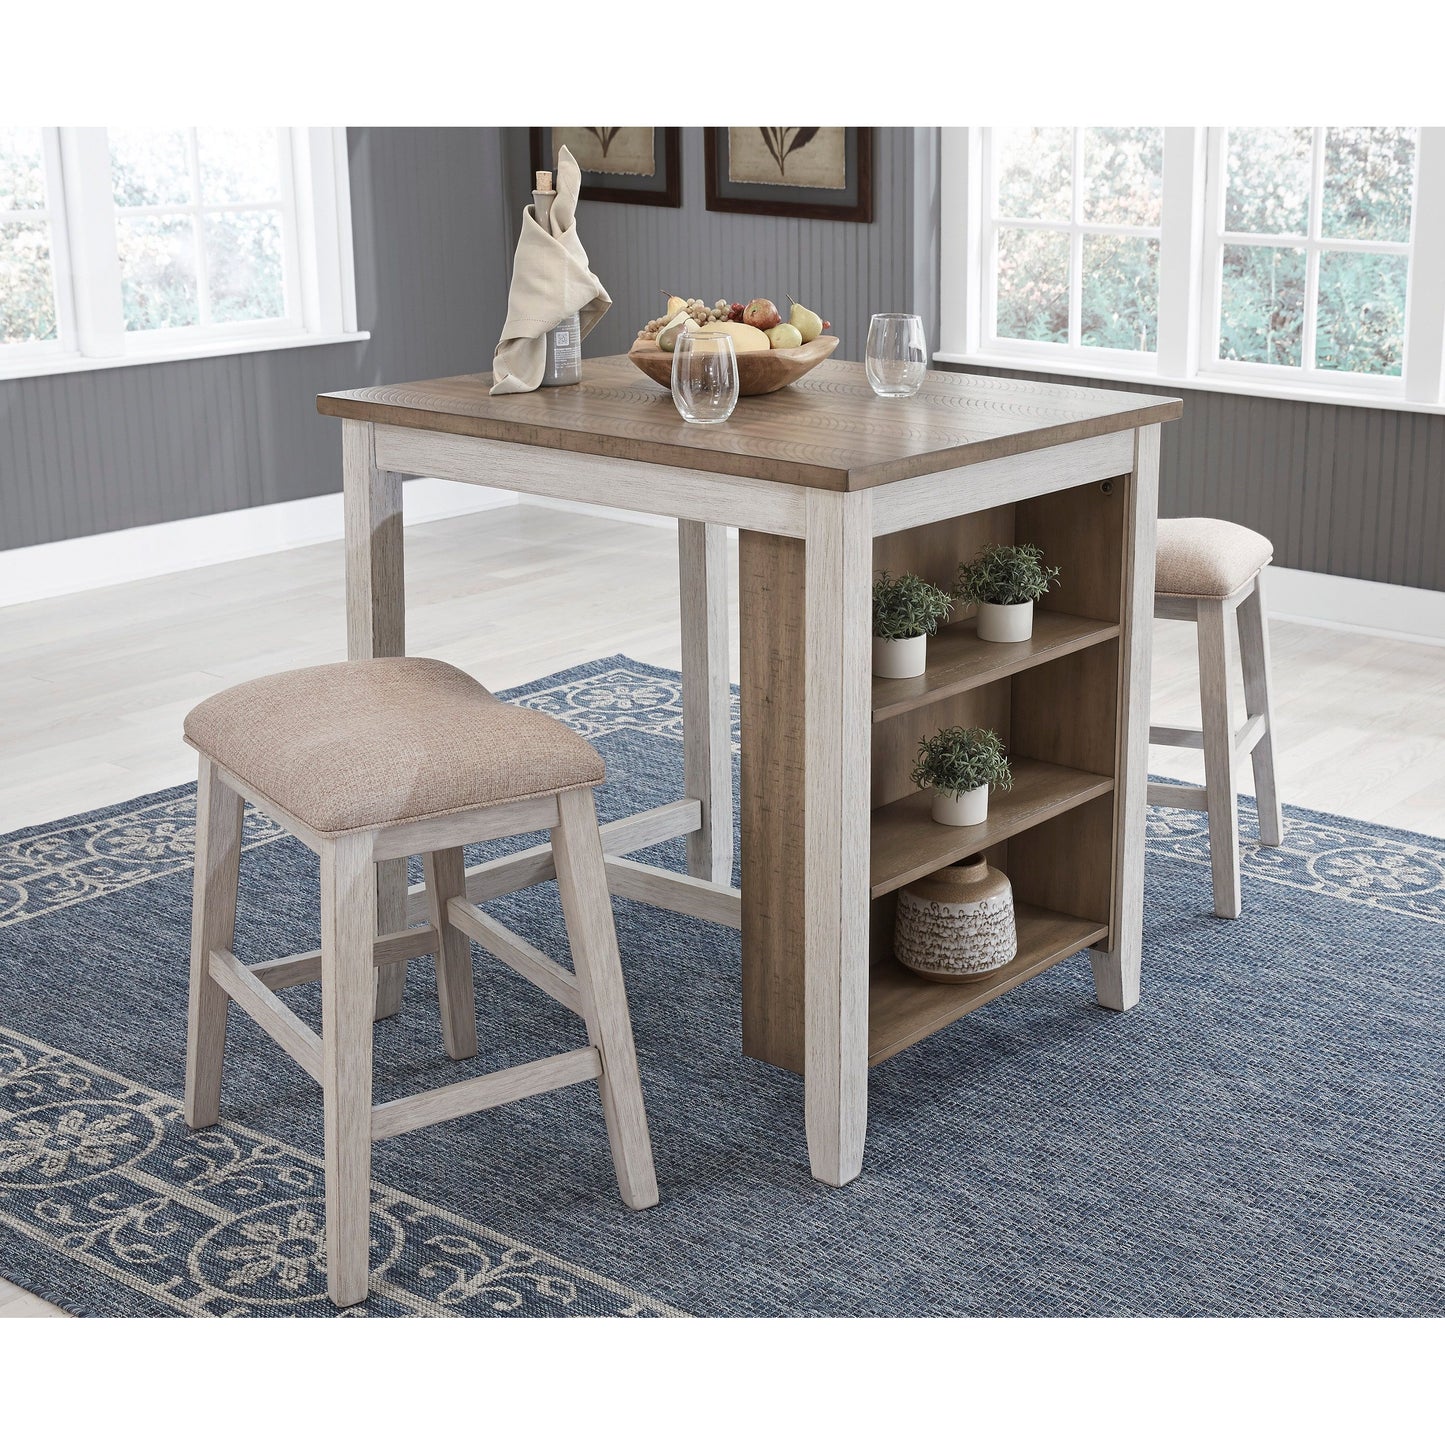 SKEMPTON COUNTER HEIGHT DINING TABLE AND BAR STOOLS (SET OF 3)